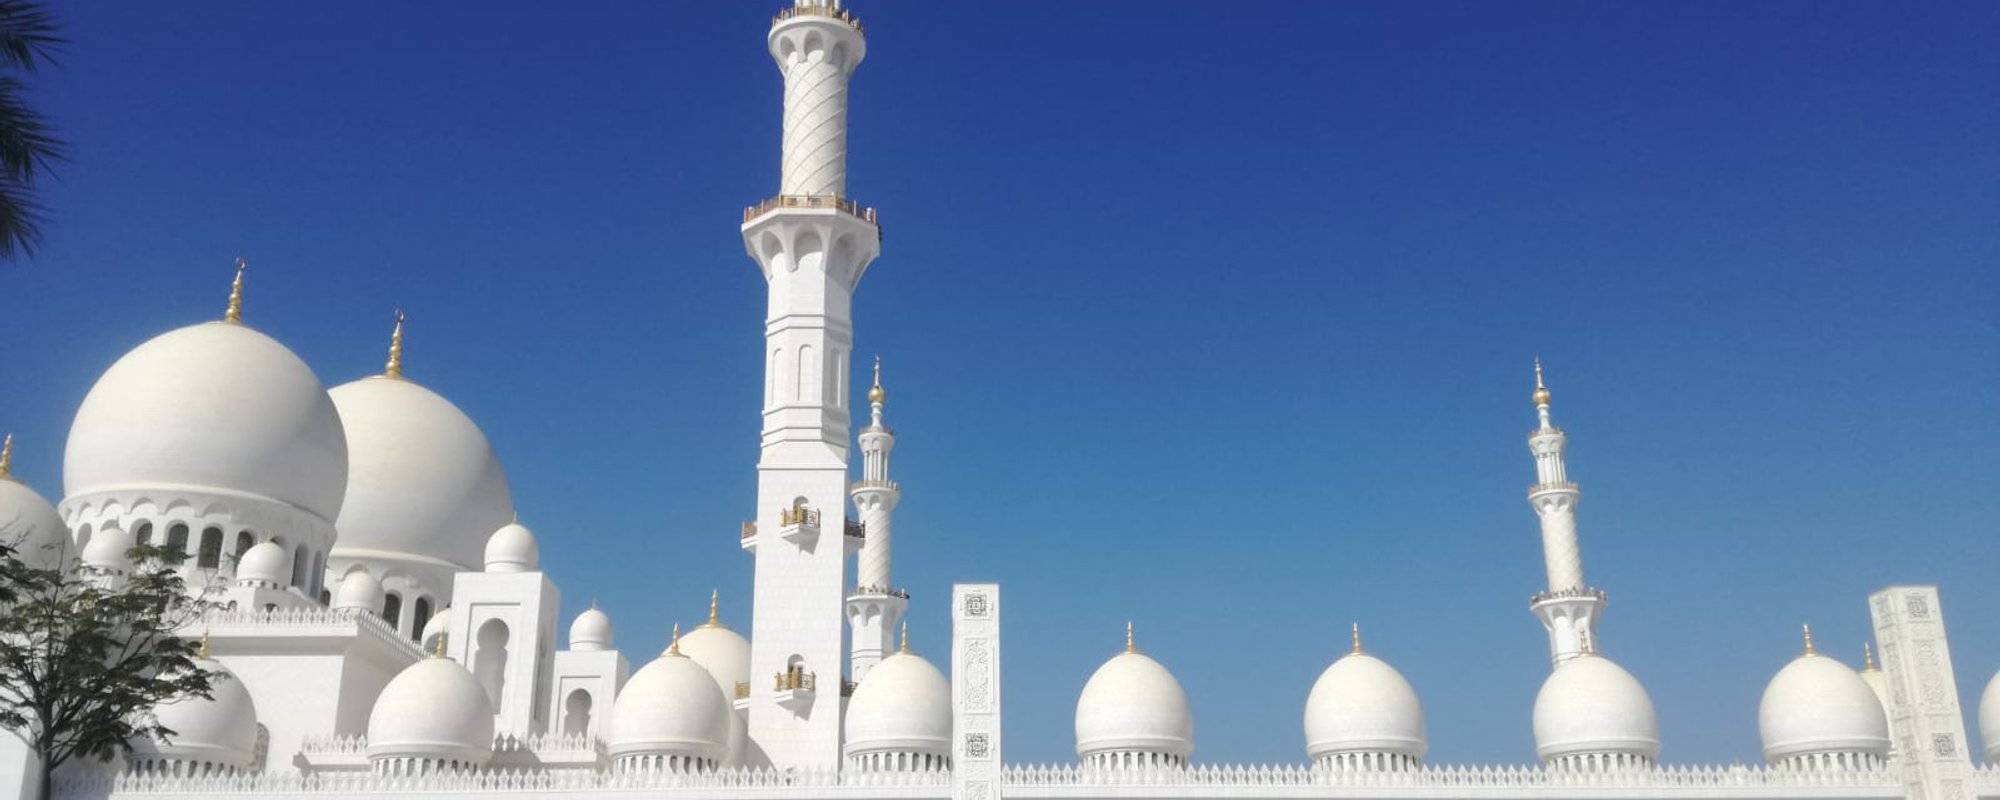 Our first impressions of Abu Dhabi after living here for a month